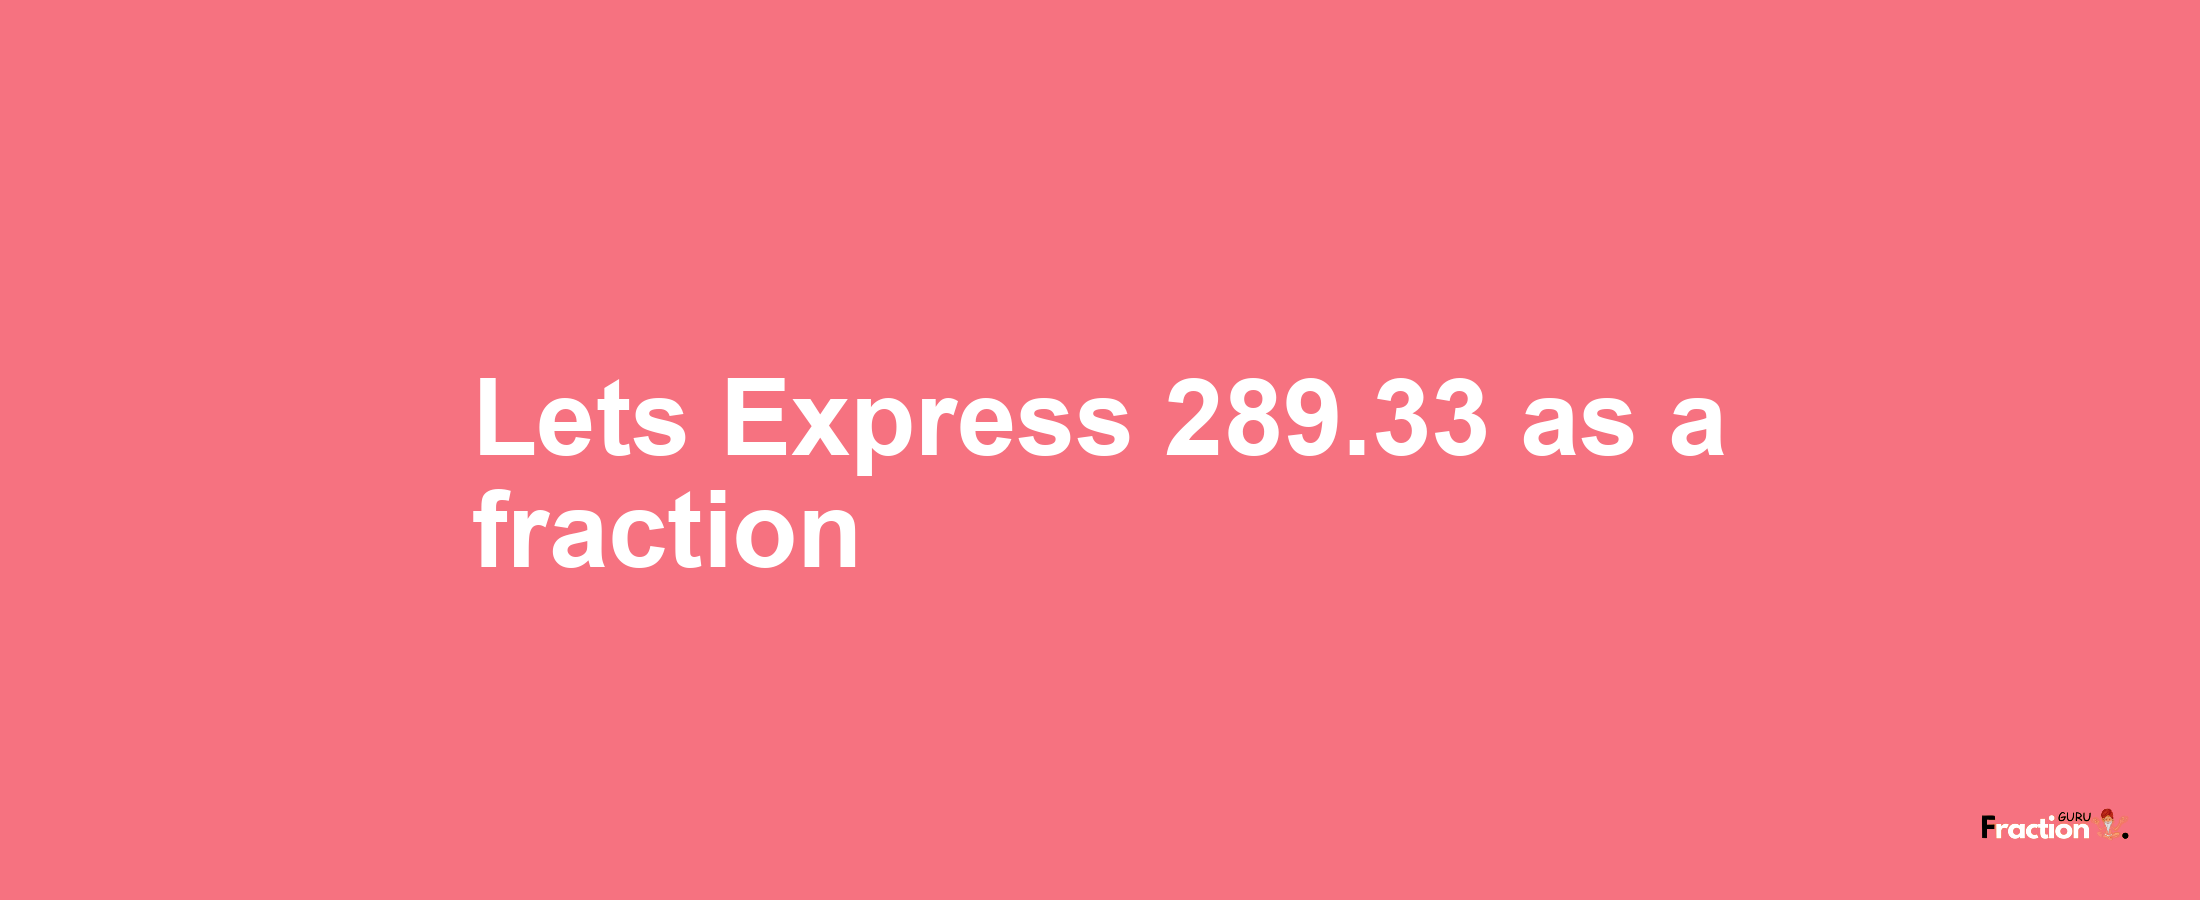 Lets Express 289.33 as afraction